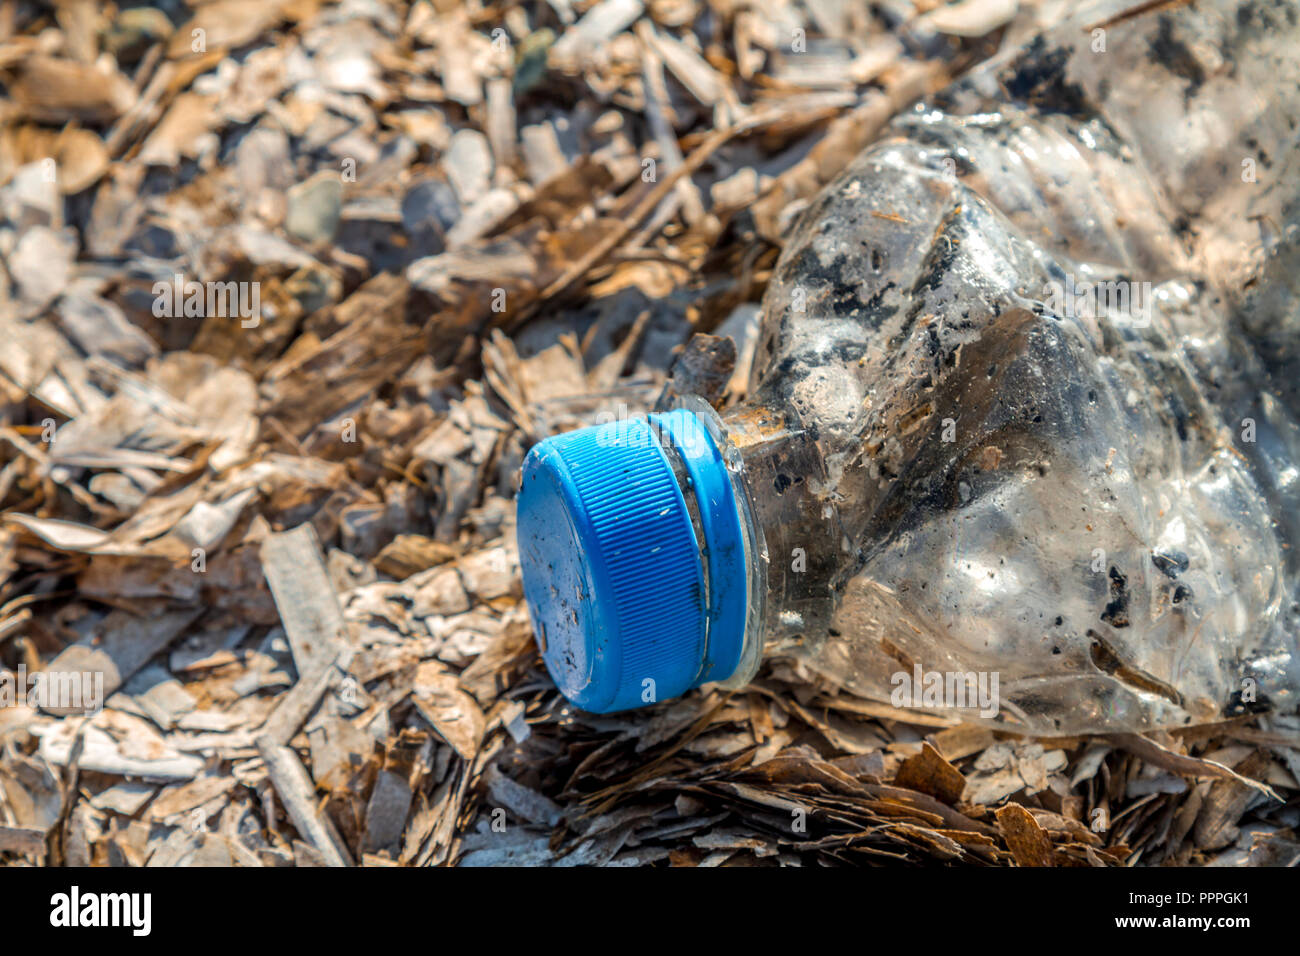 Discarded plastic pet bottle with blue top lying on a bed of dry seaweed on the shoreline causing environmental plastic pollution Stock Photo